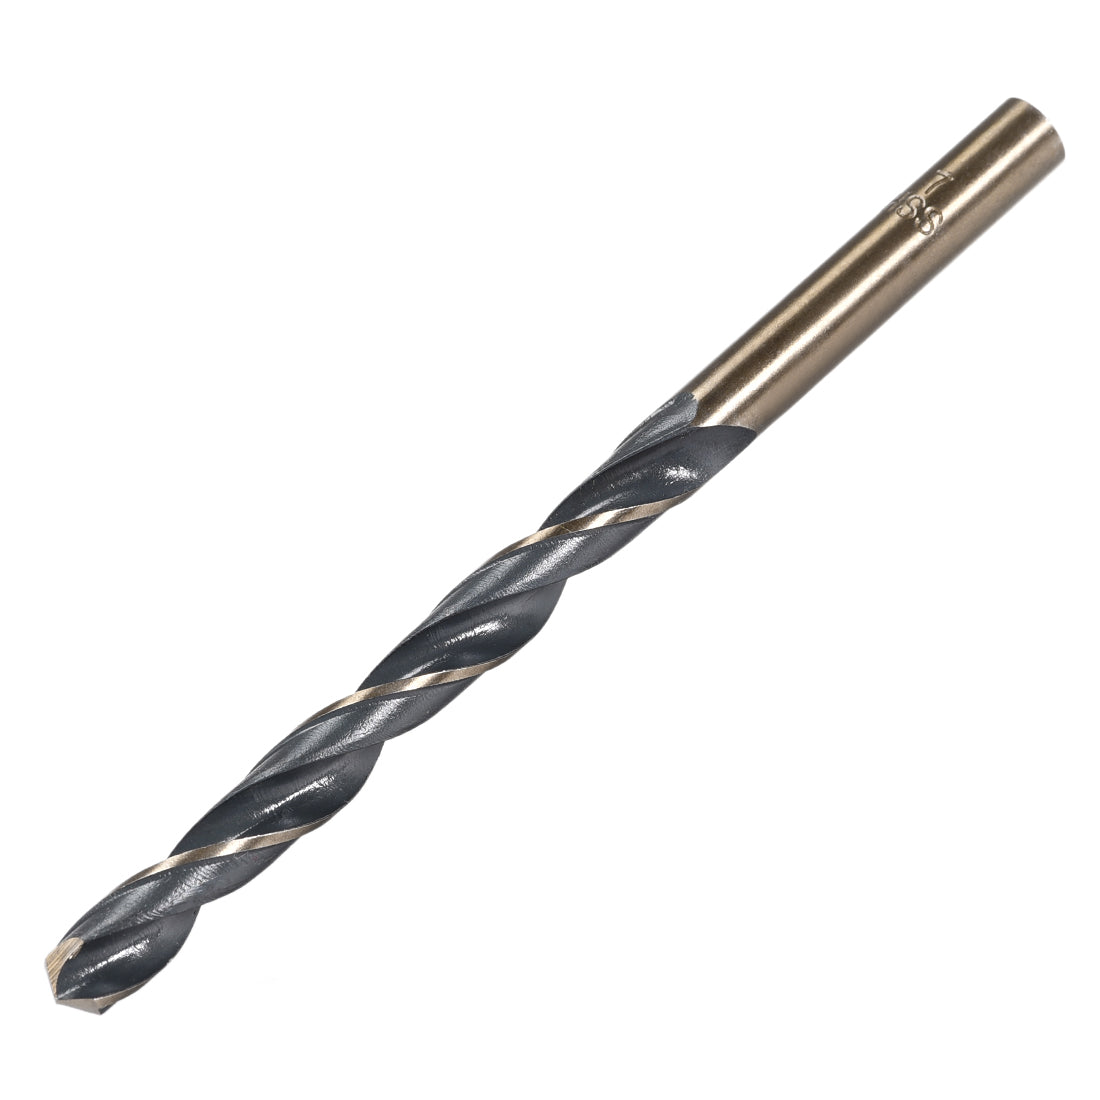 uxcell Uxcell Straight Shank Twist Drill Bits 7mm HSS 4341 with 7mm Shank